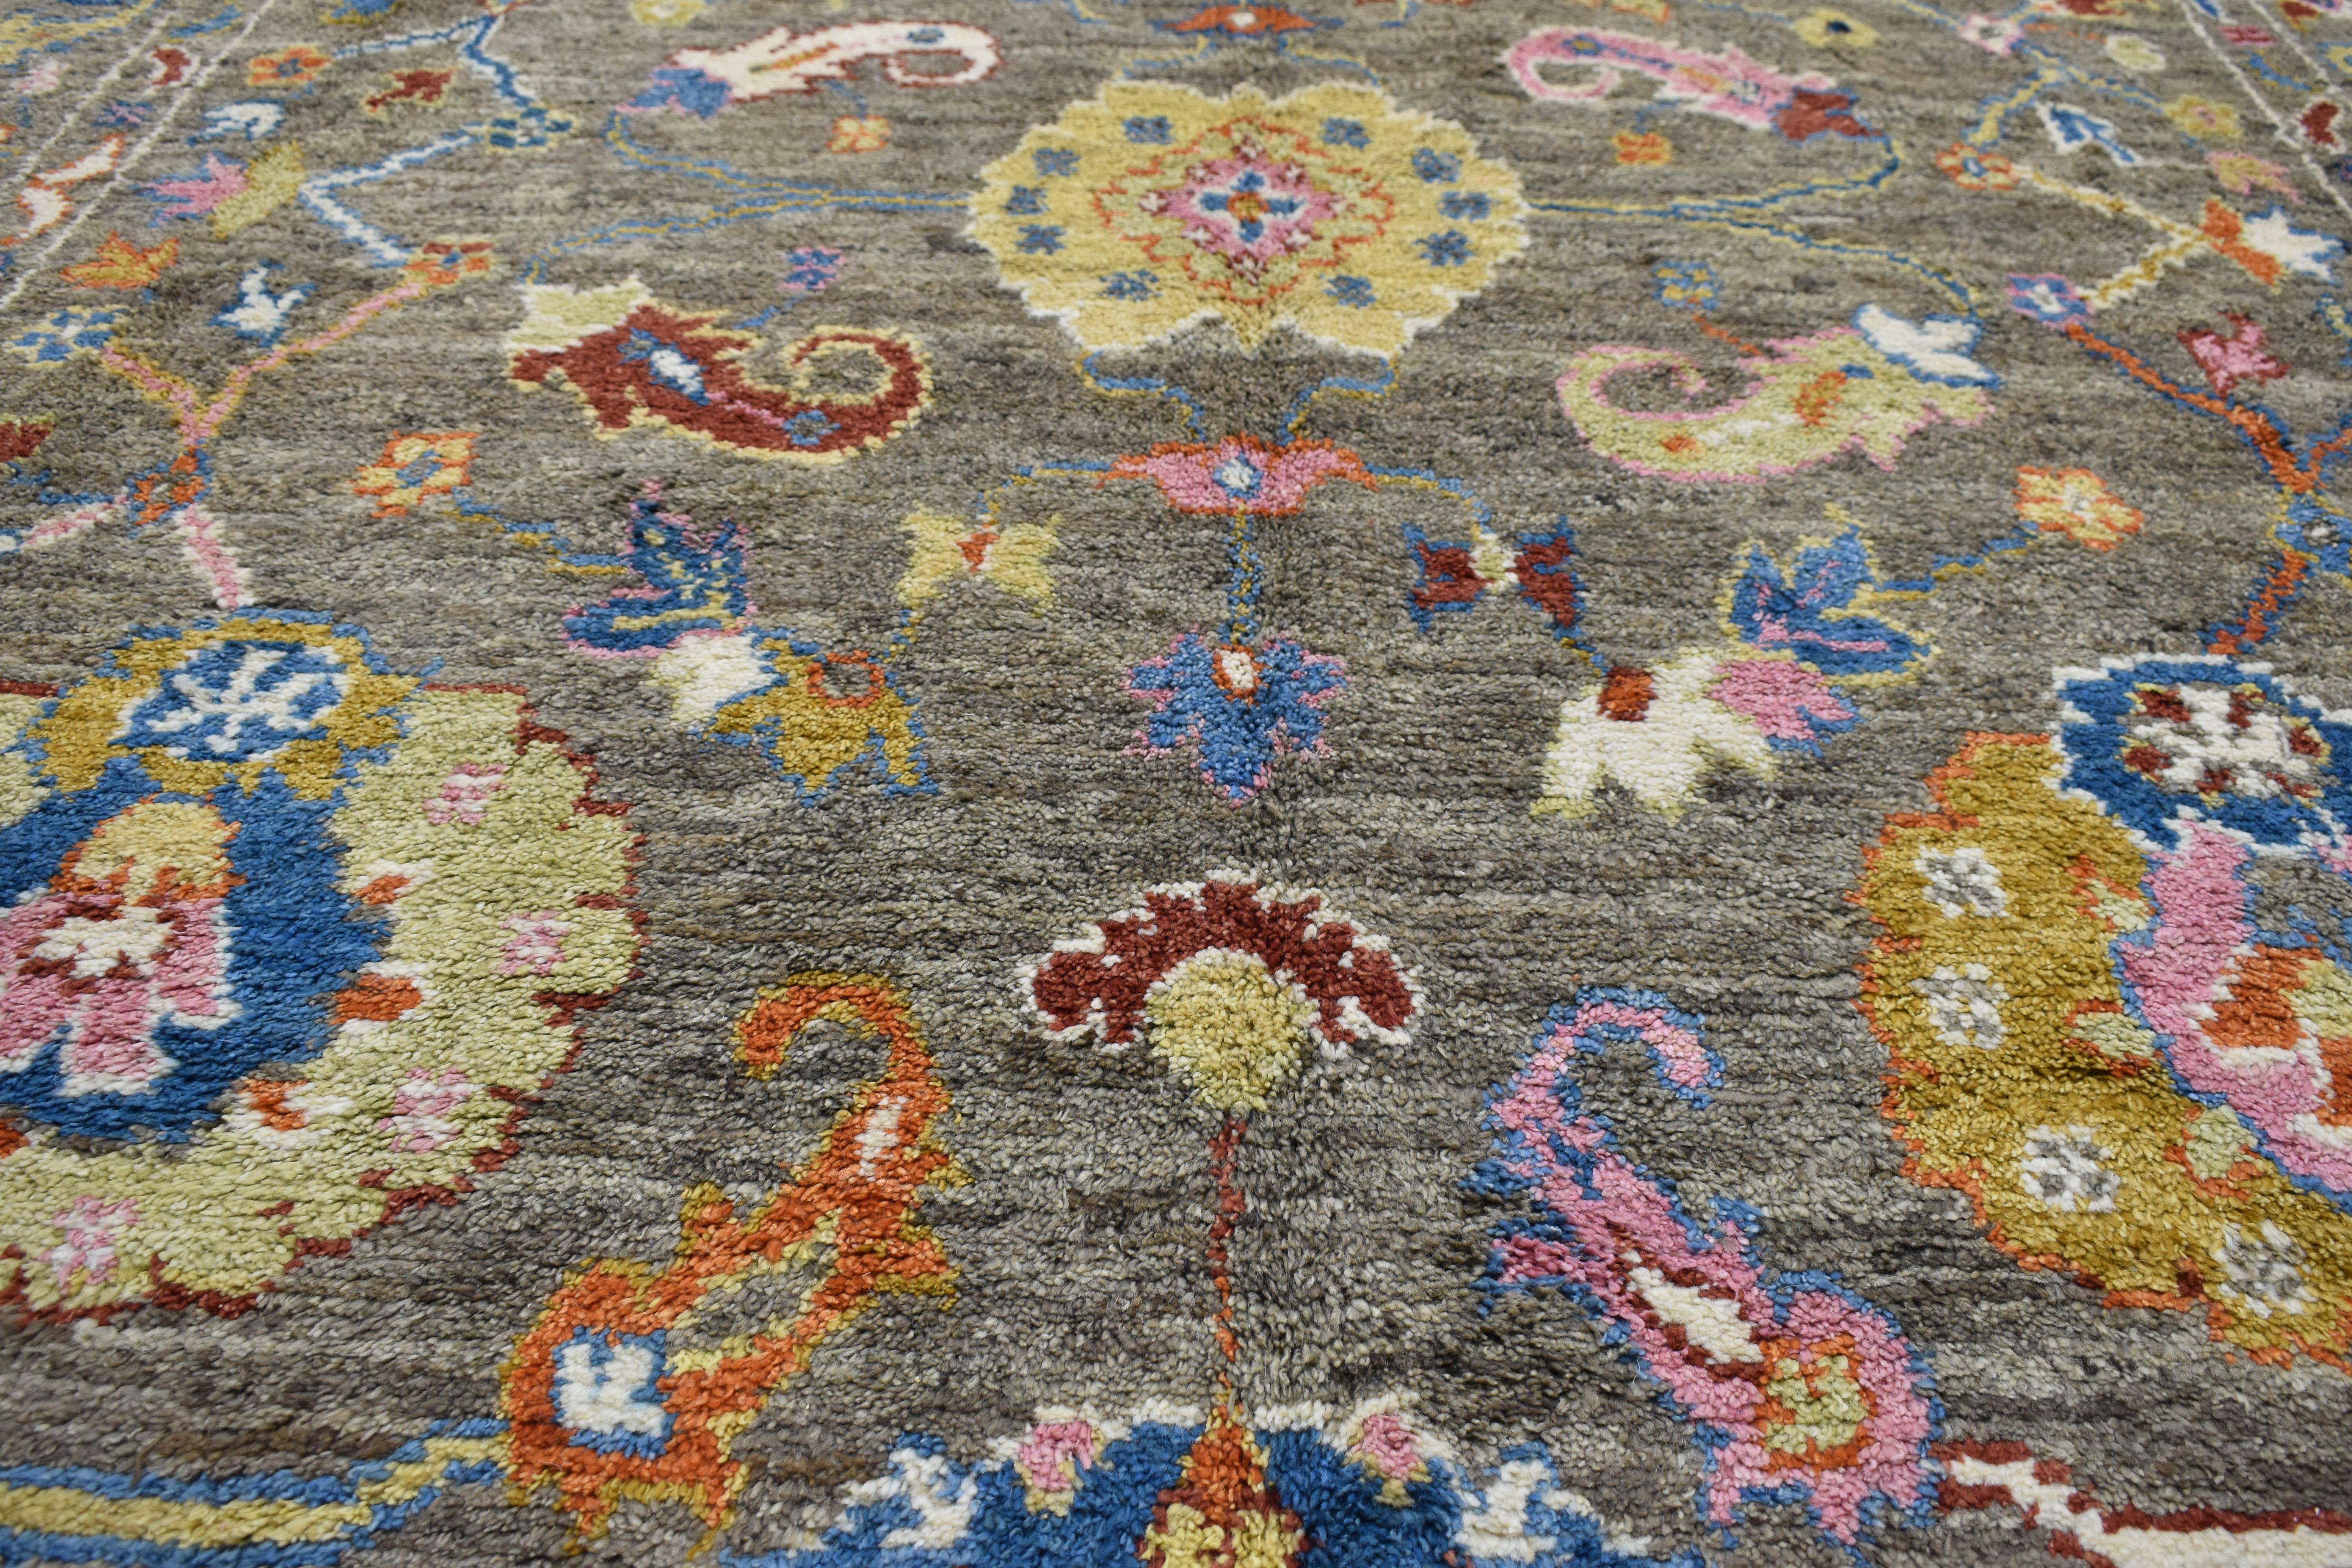 Providing elements of wanderlust and functional versatility, this modern Oushak style rug with bright colors displays a combination of exquisitely balanced designs creating a tastefully casual space with a robust combination of texture and pattern.